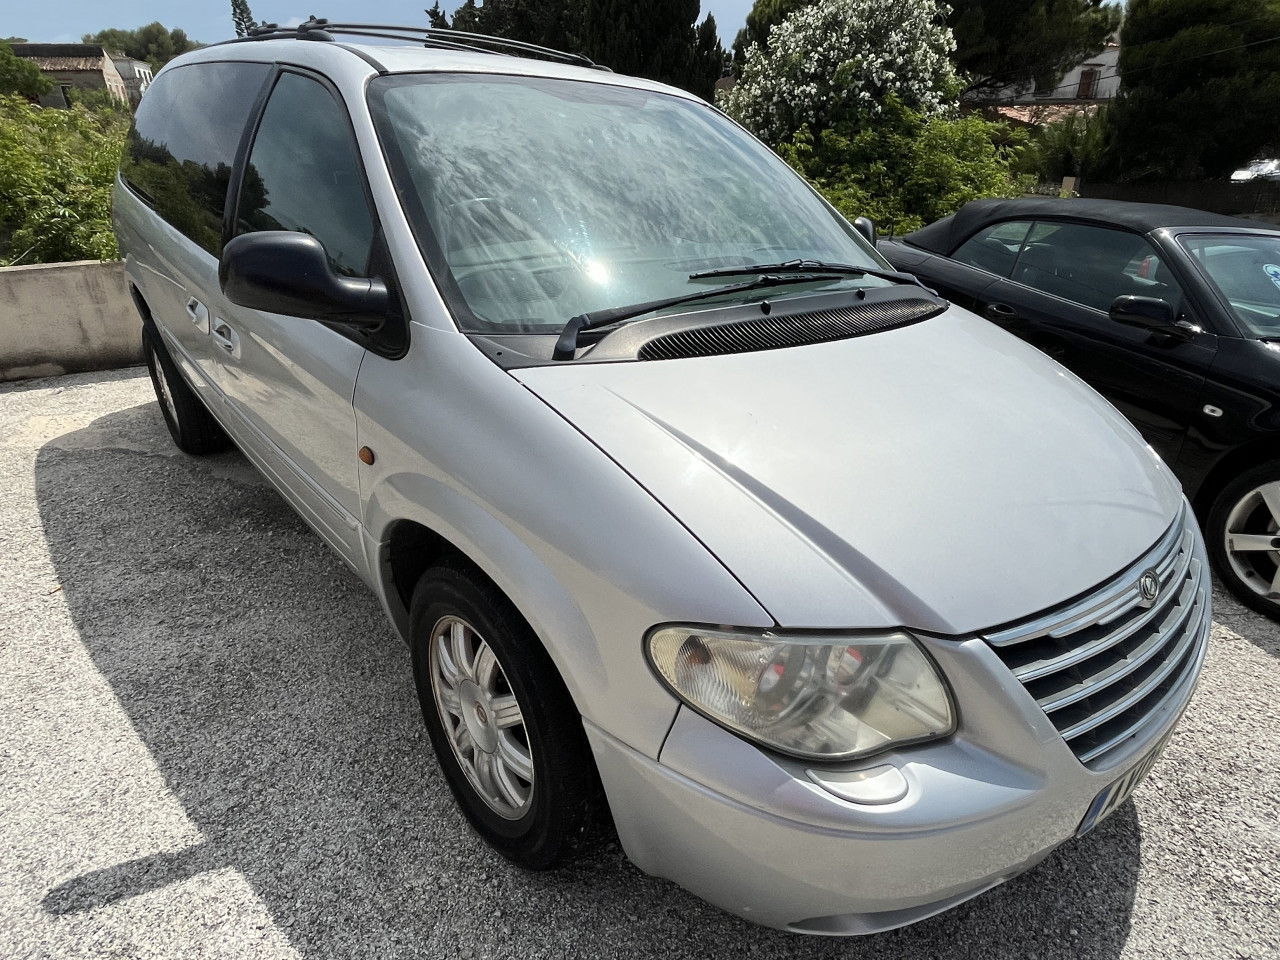 Chrysler Grand Voyager 2.8 Crdi Limited Xsa Automatic People carrier 2005 